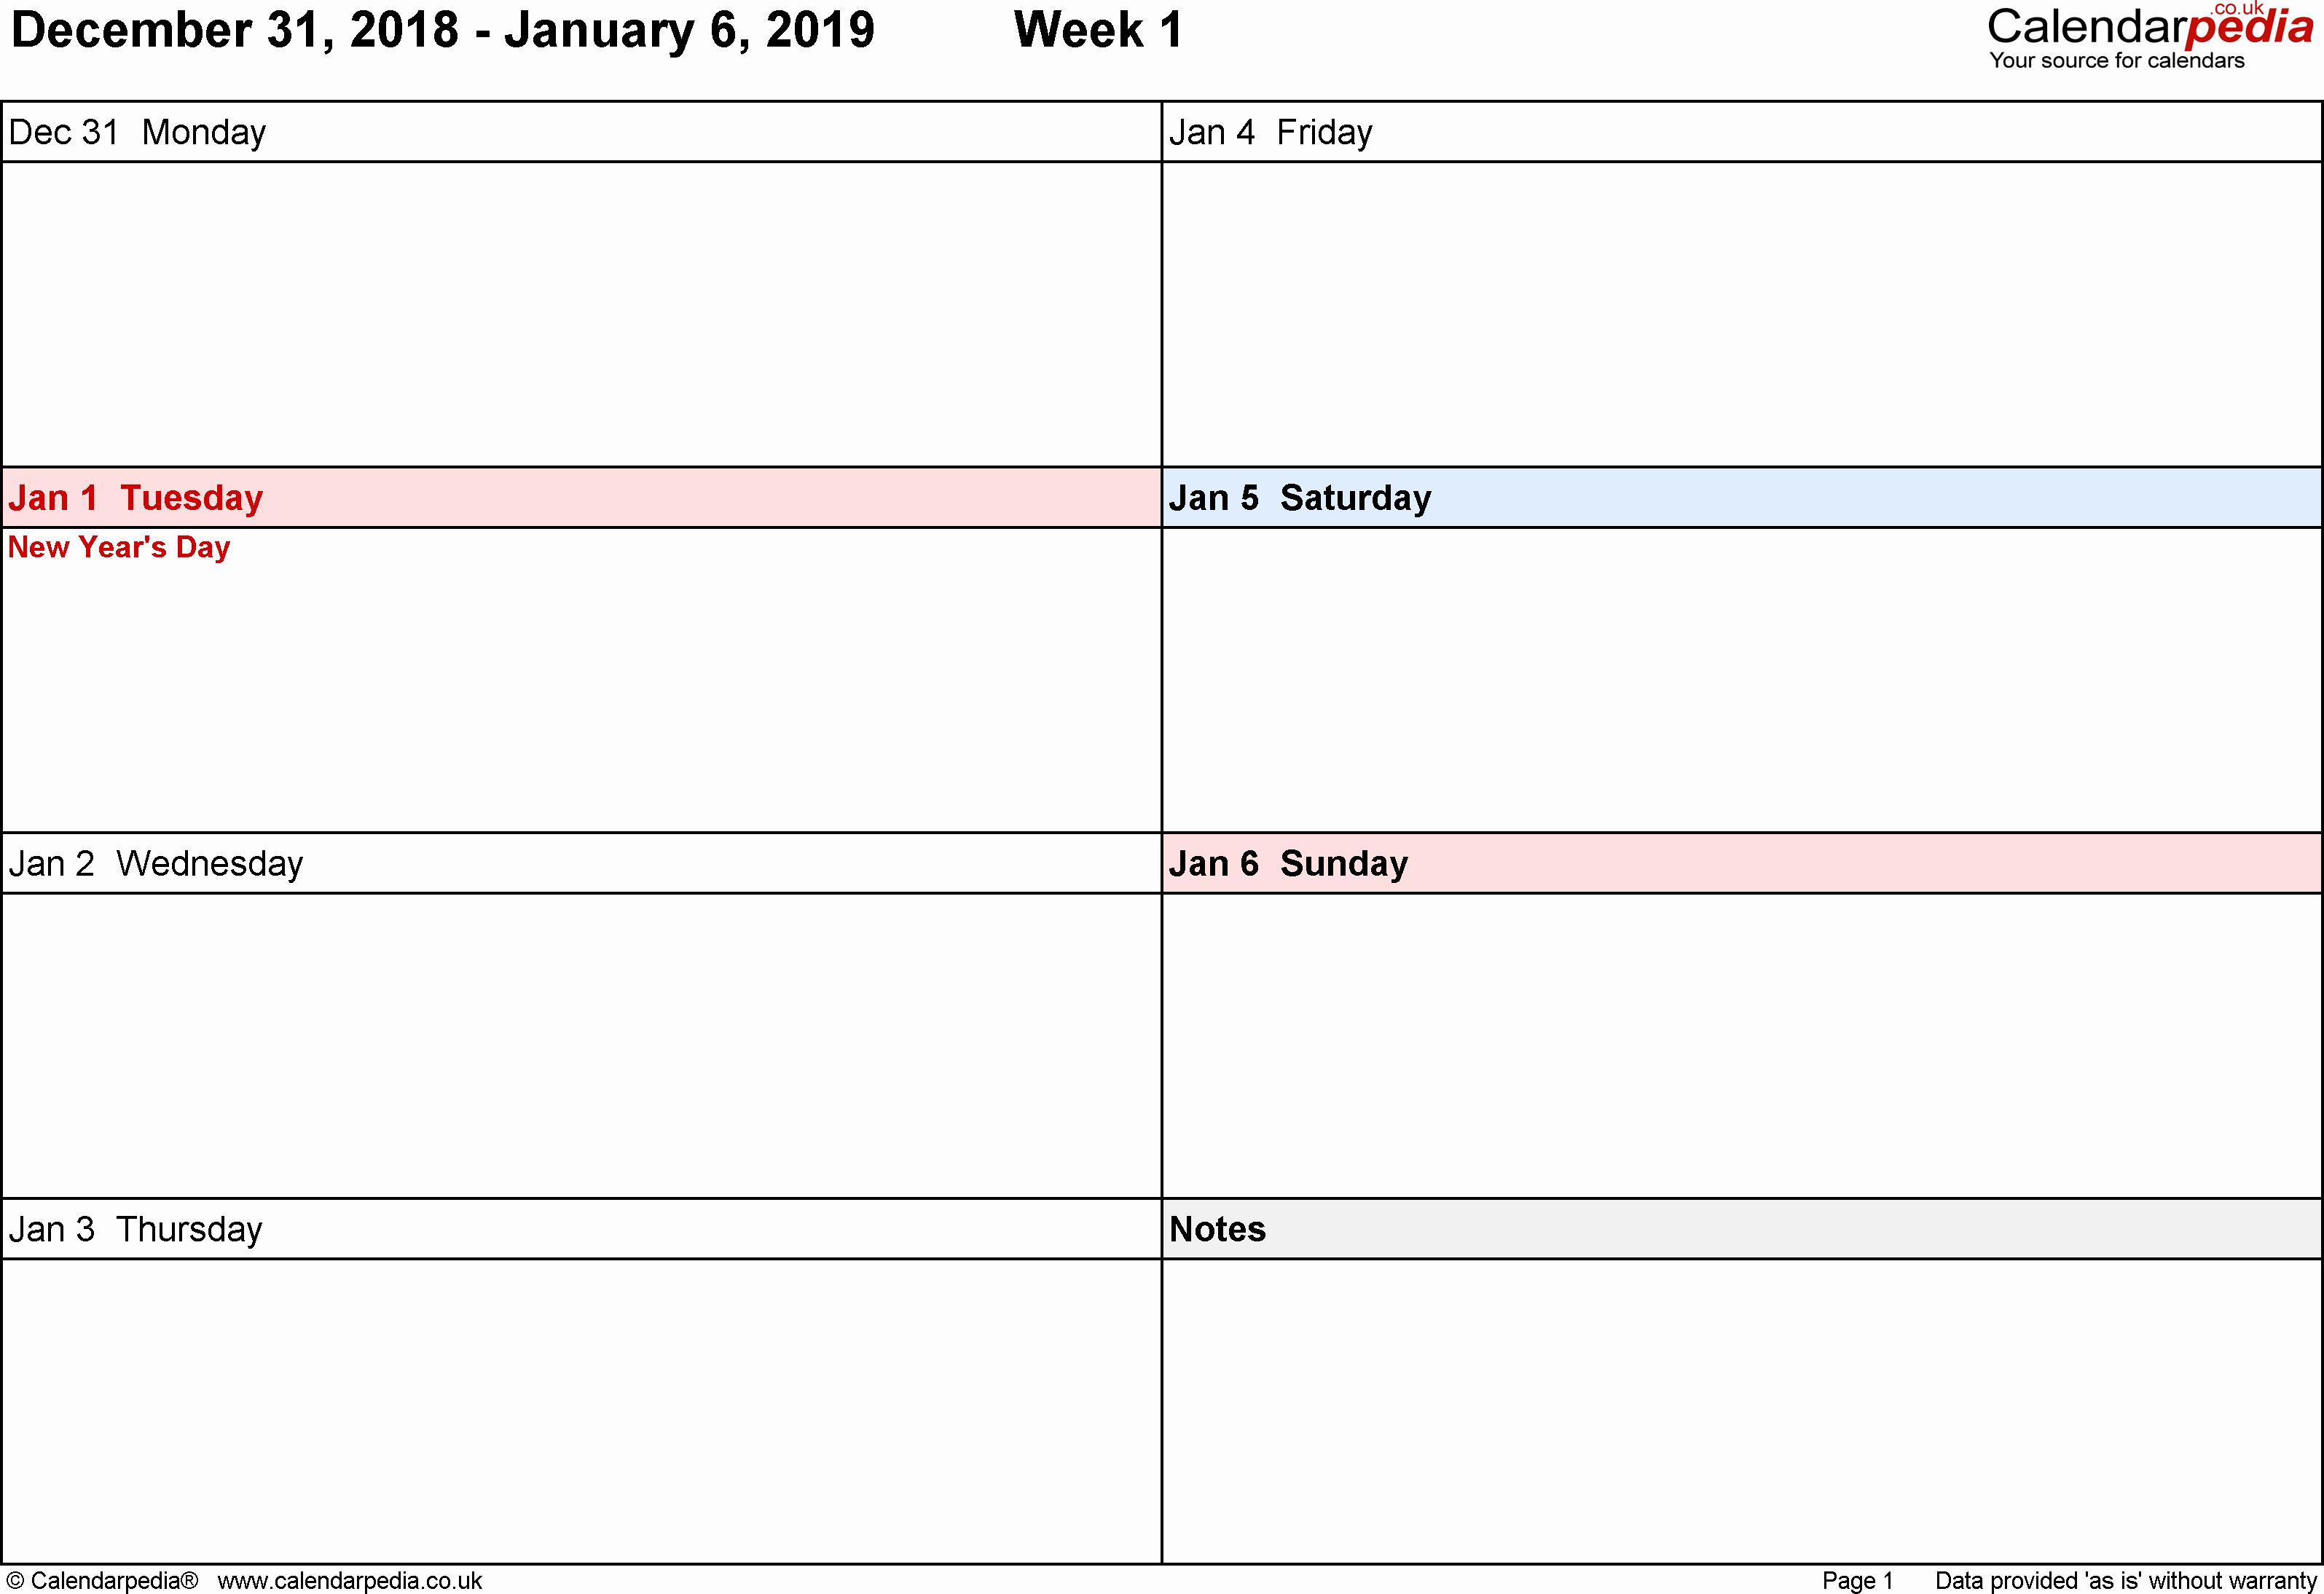 Weekly Calendar Template 2019 Awesome Weekly Calendar 2019 Uk Free Printable Templates for Excel